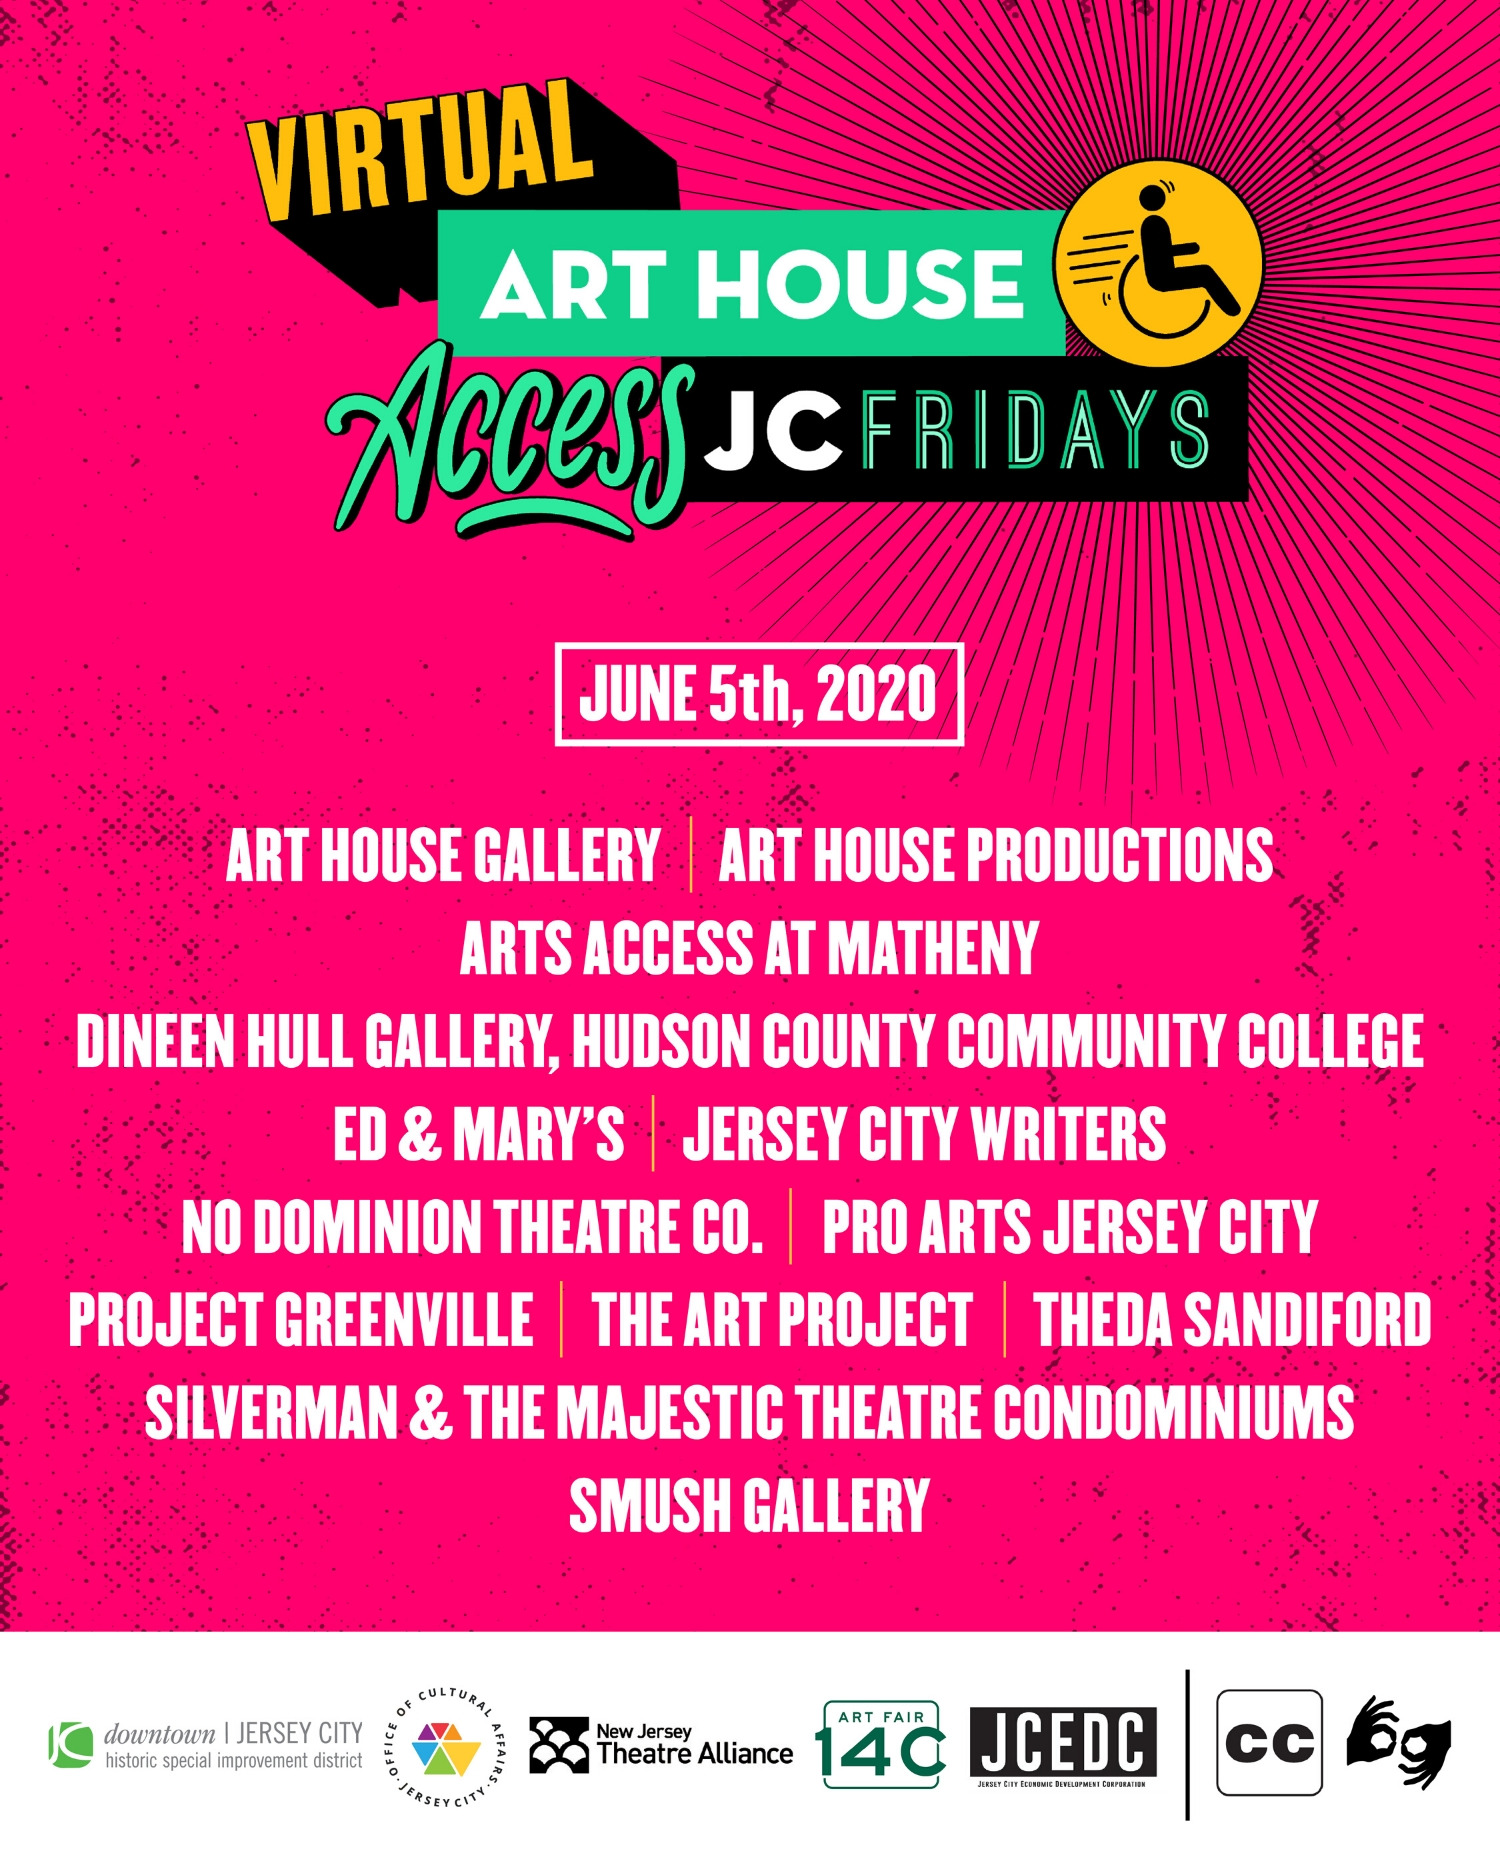 Social flyer for Virtual Art House Access JC Fridays, June 5th 2020; Art House Gallery, Art House Productions, Art Access at Matheny, Dineen Hull Gallery, Hudson County Community College, Ed & Mary's, Jersey City Writers, No Dominion Theatre Co, Pro Arts Jersey City, Project Greenville, The Art Project, Theda Sandiford, SIlverman & The Majestic Theatre Condominiums, Smush Gallery